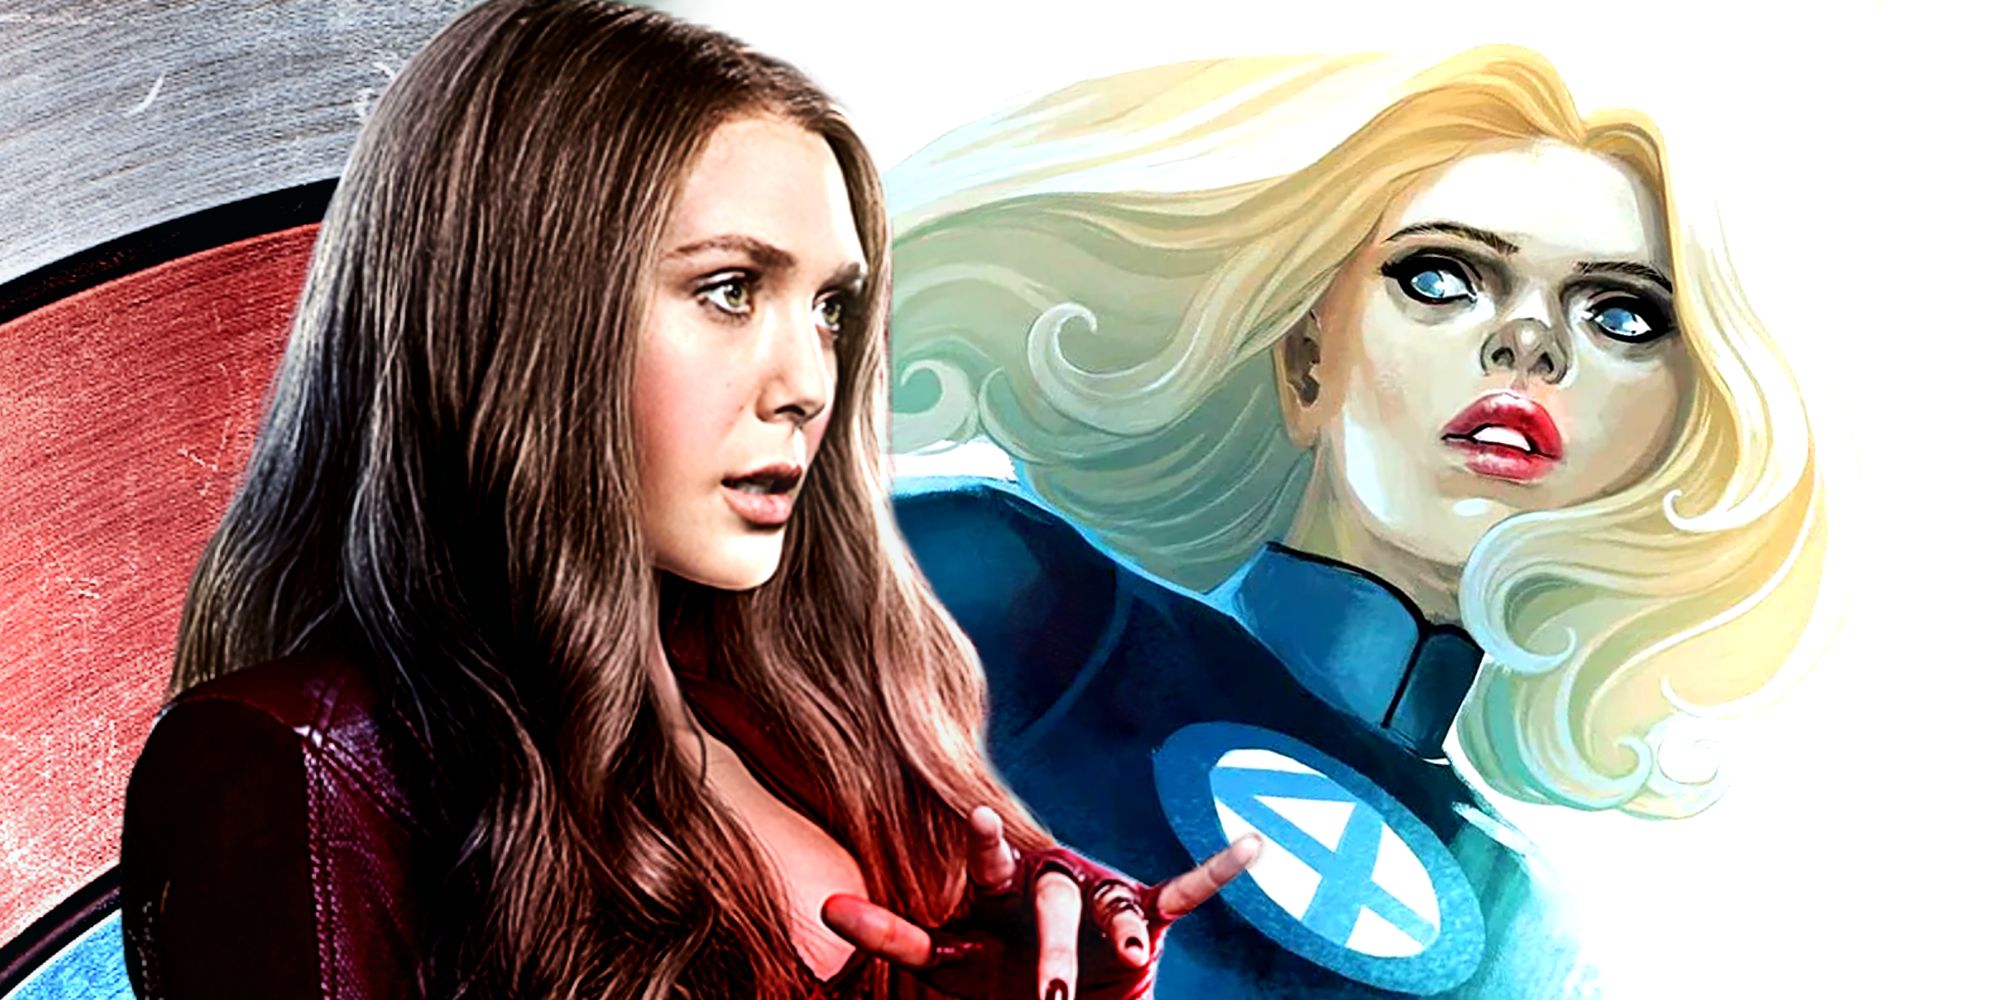 Scarlet Witch in the MCU and Invisible Woman in Marvel Comics